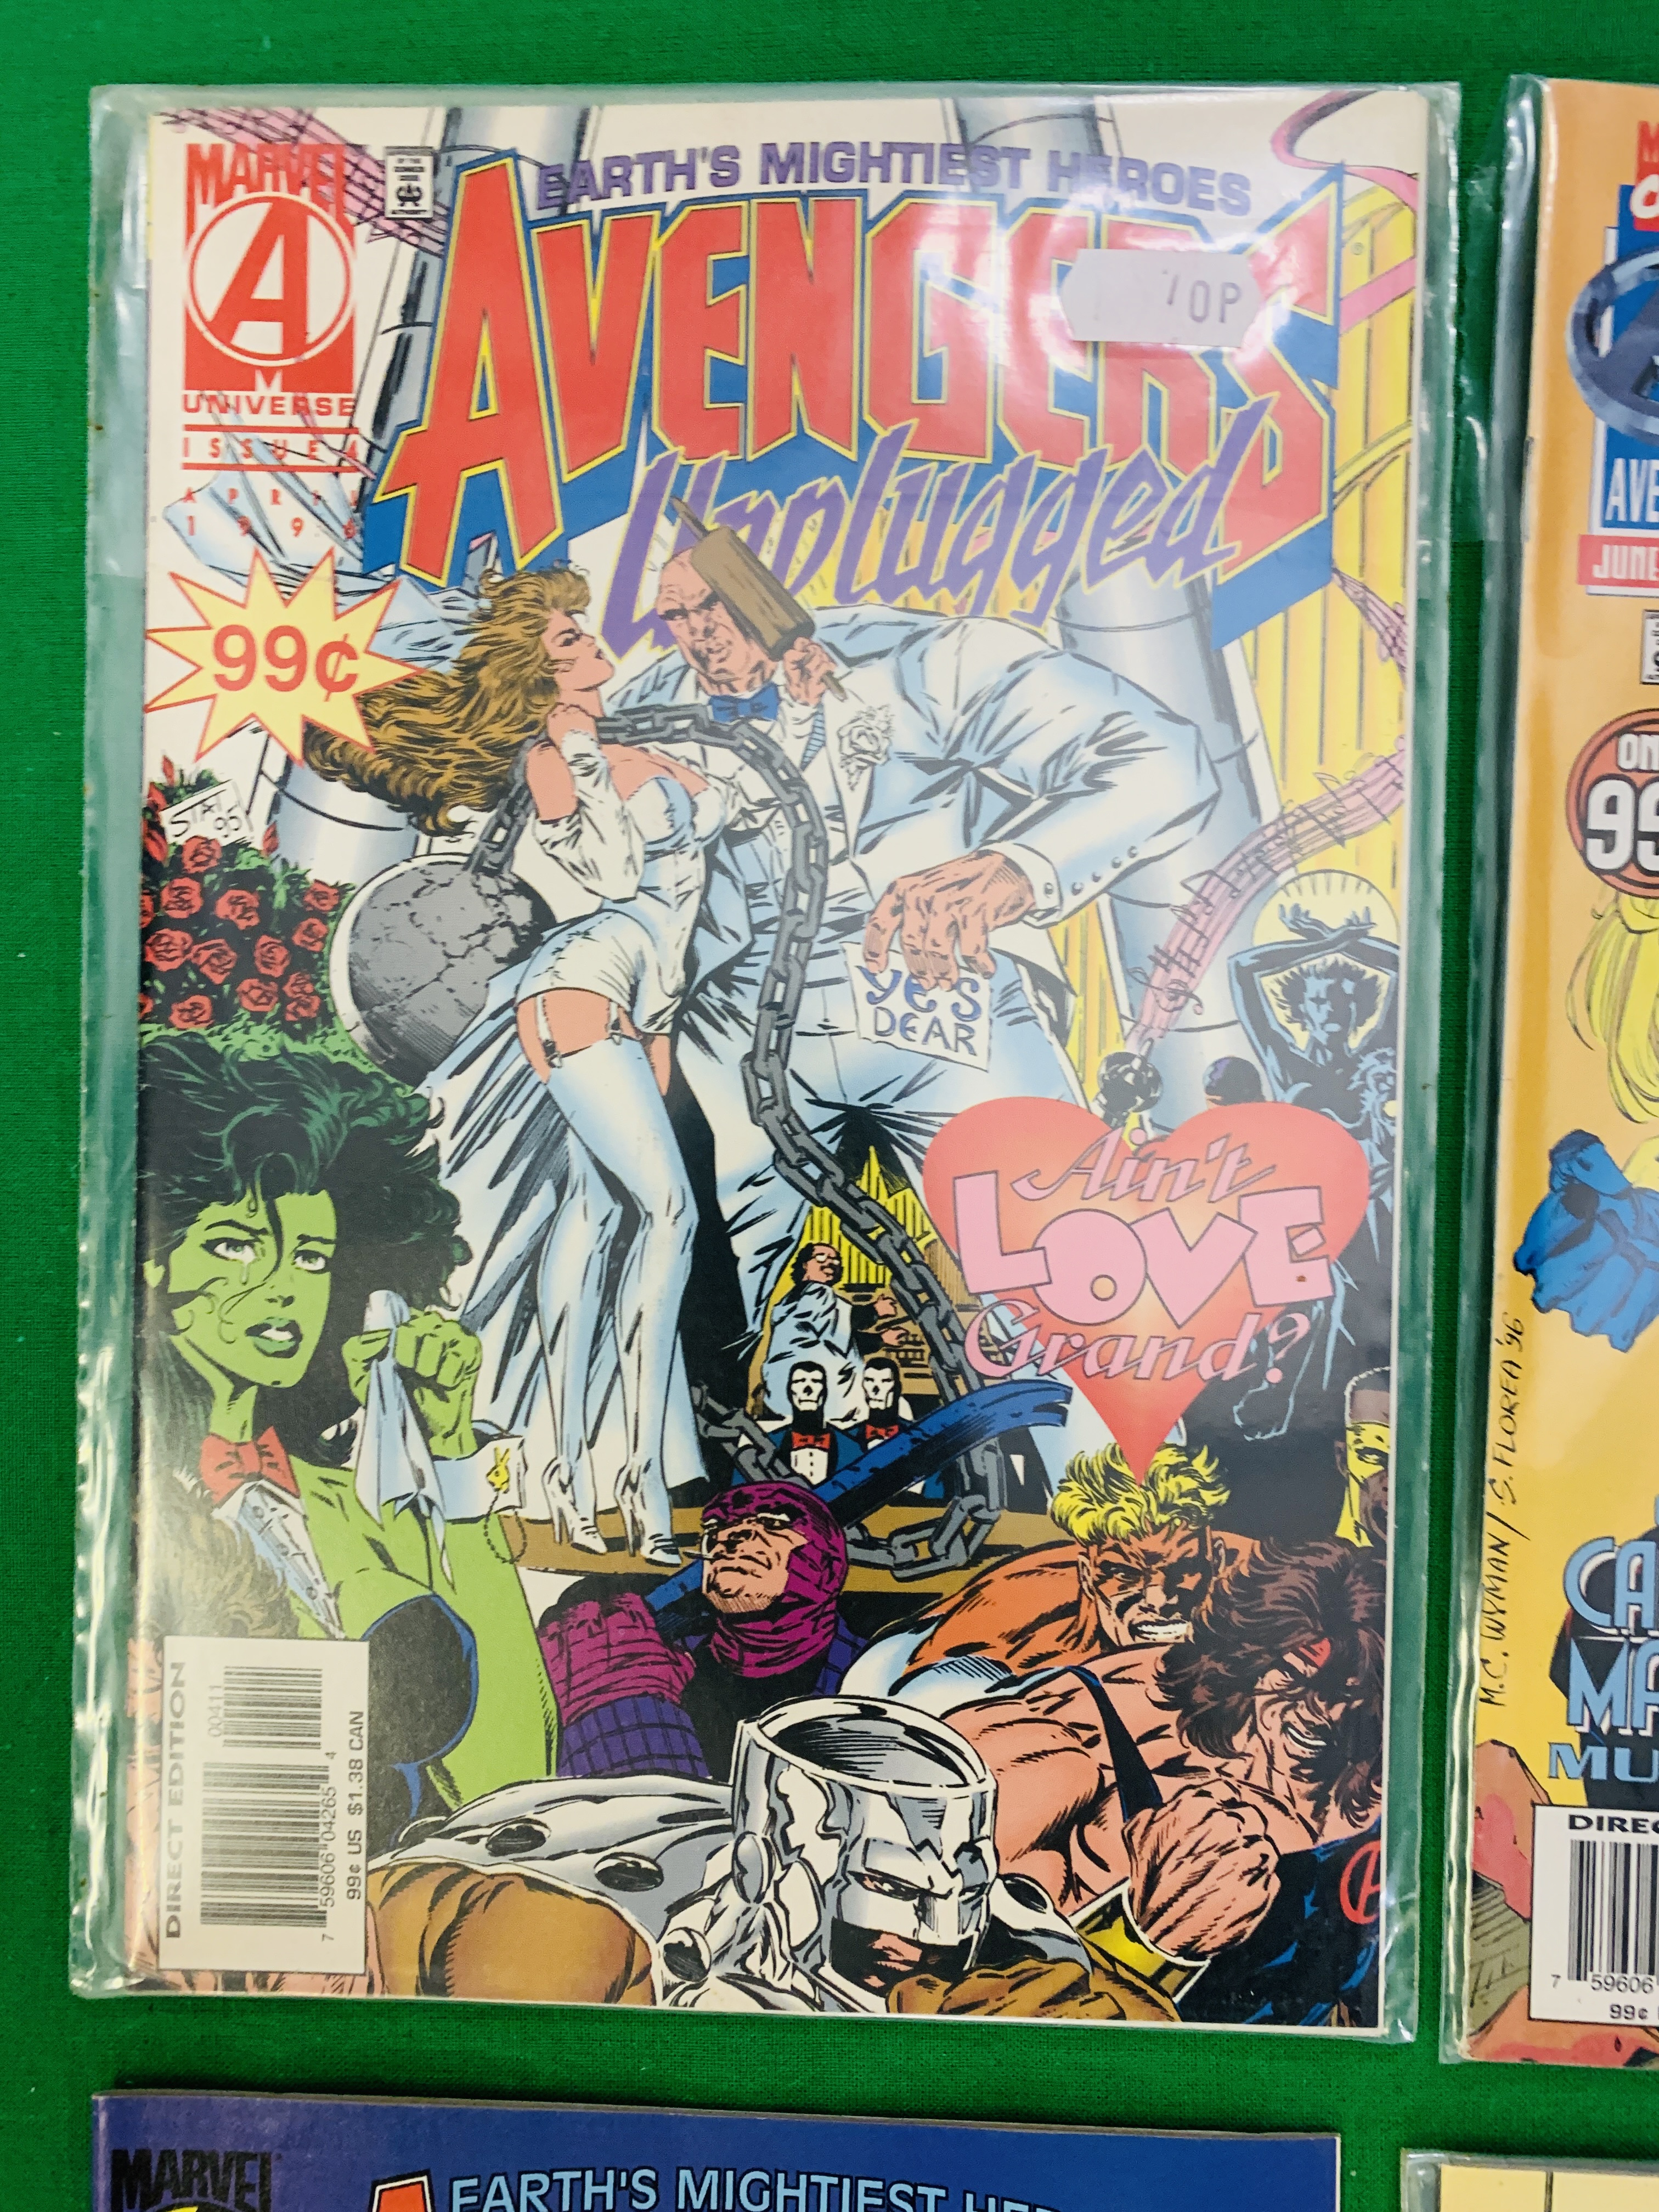 MARVEL COMICS THE AVENGERS UNPLUGGED NO. 1 - 6 FROM 1996, FIRST APPEARANCE NO. 5. MONICA RAMBEAU. - Image 5 of 7